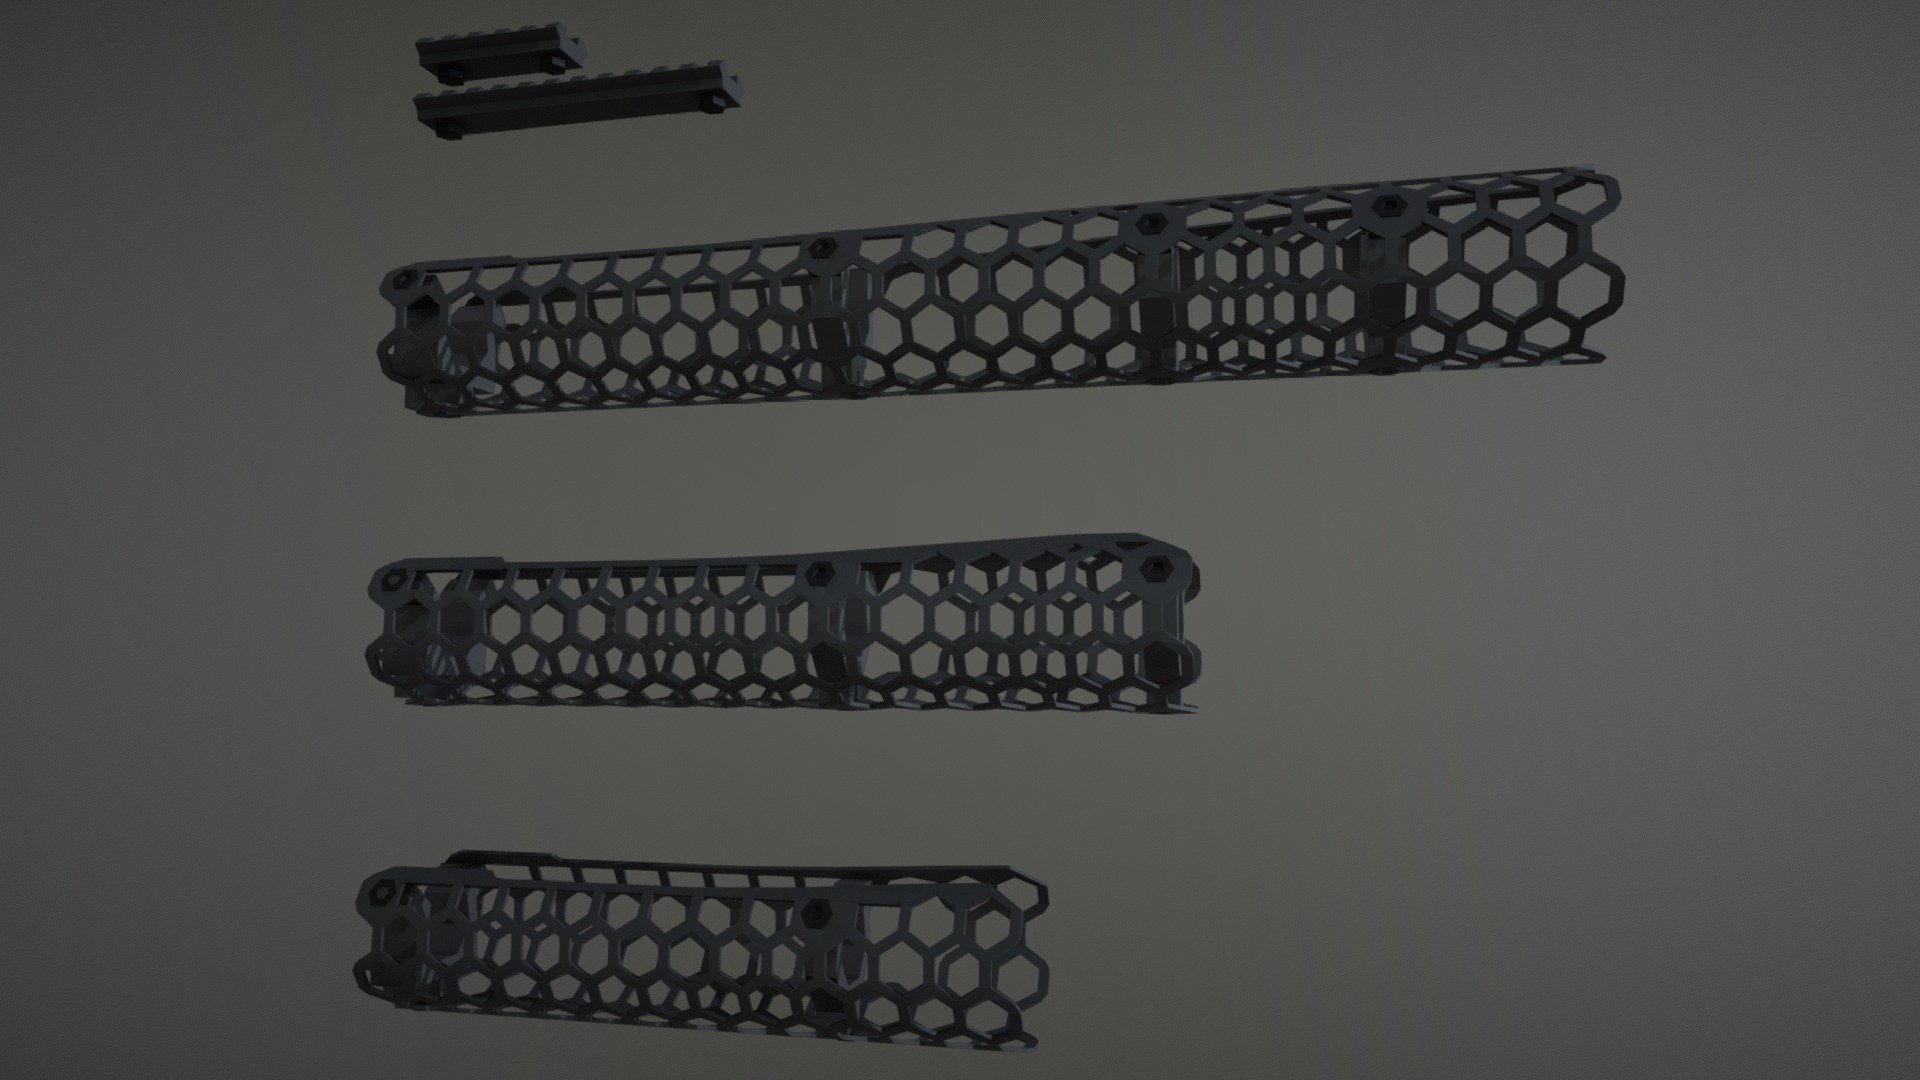 Low-Poly models of some interesting AK handguards, made my Hexagon Tactical, apparently a russian company. while the three lengths are made for specific rifle lengths, you can also attach a shorter handguard onto a longer rifle to keep it as light as possible, or attach a long one on a carbine like the AK-105 to partially cover a suppressor. 

Includes two attachment rails, can be mounted on any of the hexagons, allowing for incredible customizability when it comes to attachments 3d model